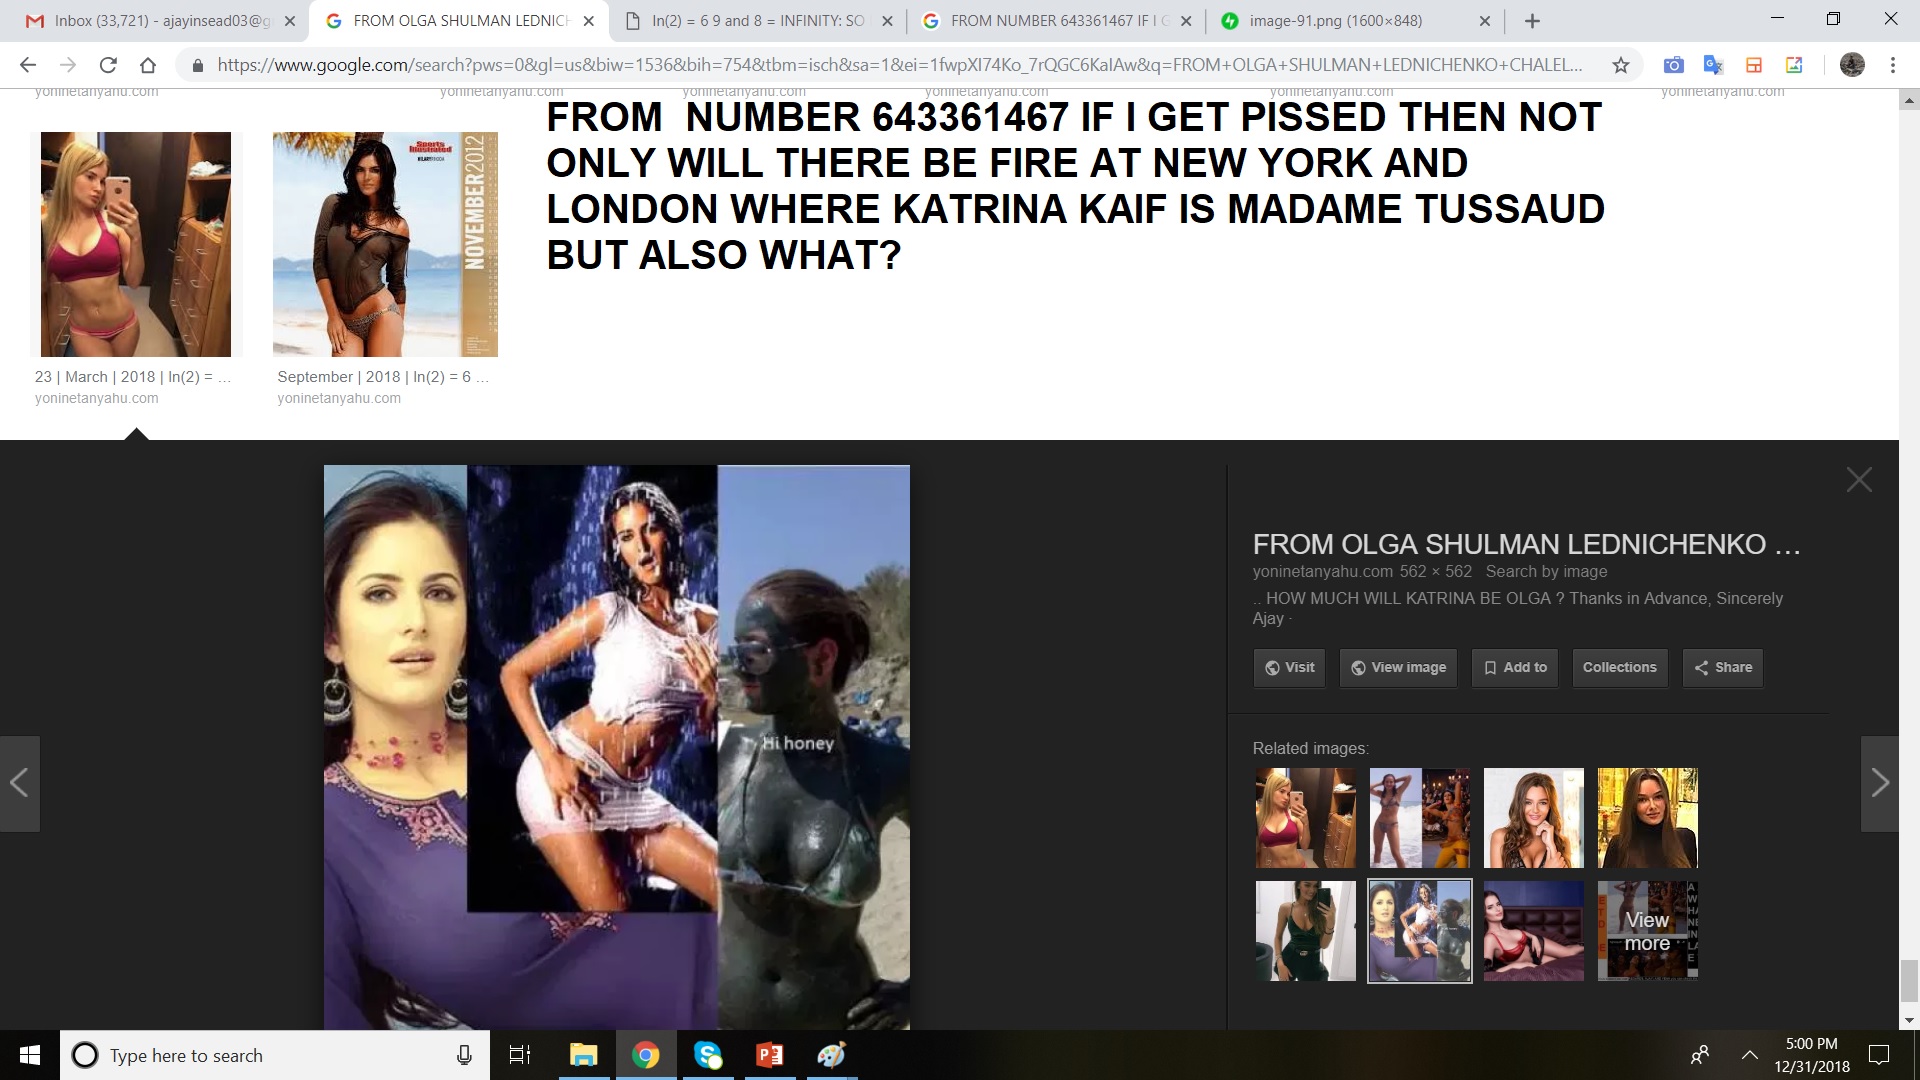 FROM NUMBER 643361467 IF I GET PISSED THEN NOT ONLY WILL THERE BE FIRE AT NEW YORK AND LONDON WHERE KATRINA KAIF IS MADAME TUSSAUD BUT ALSO WHAT